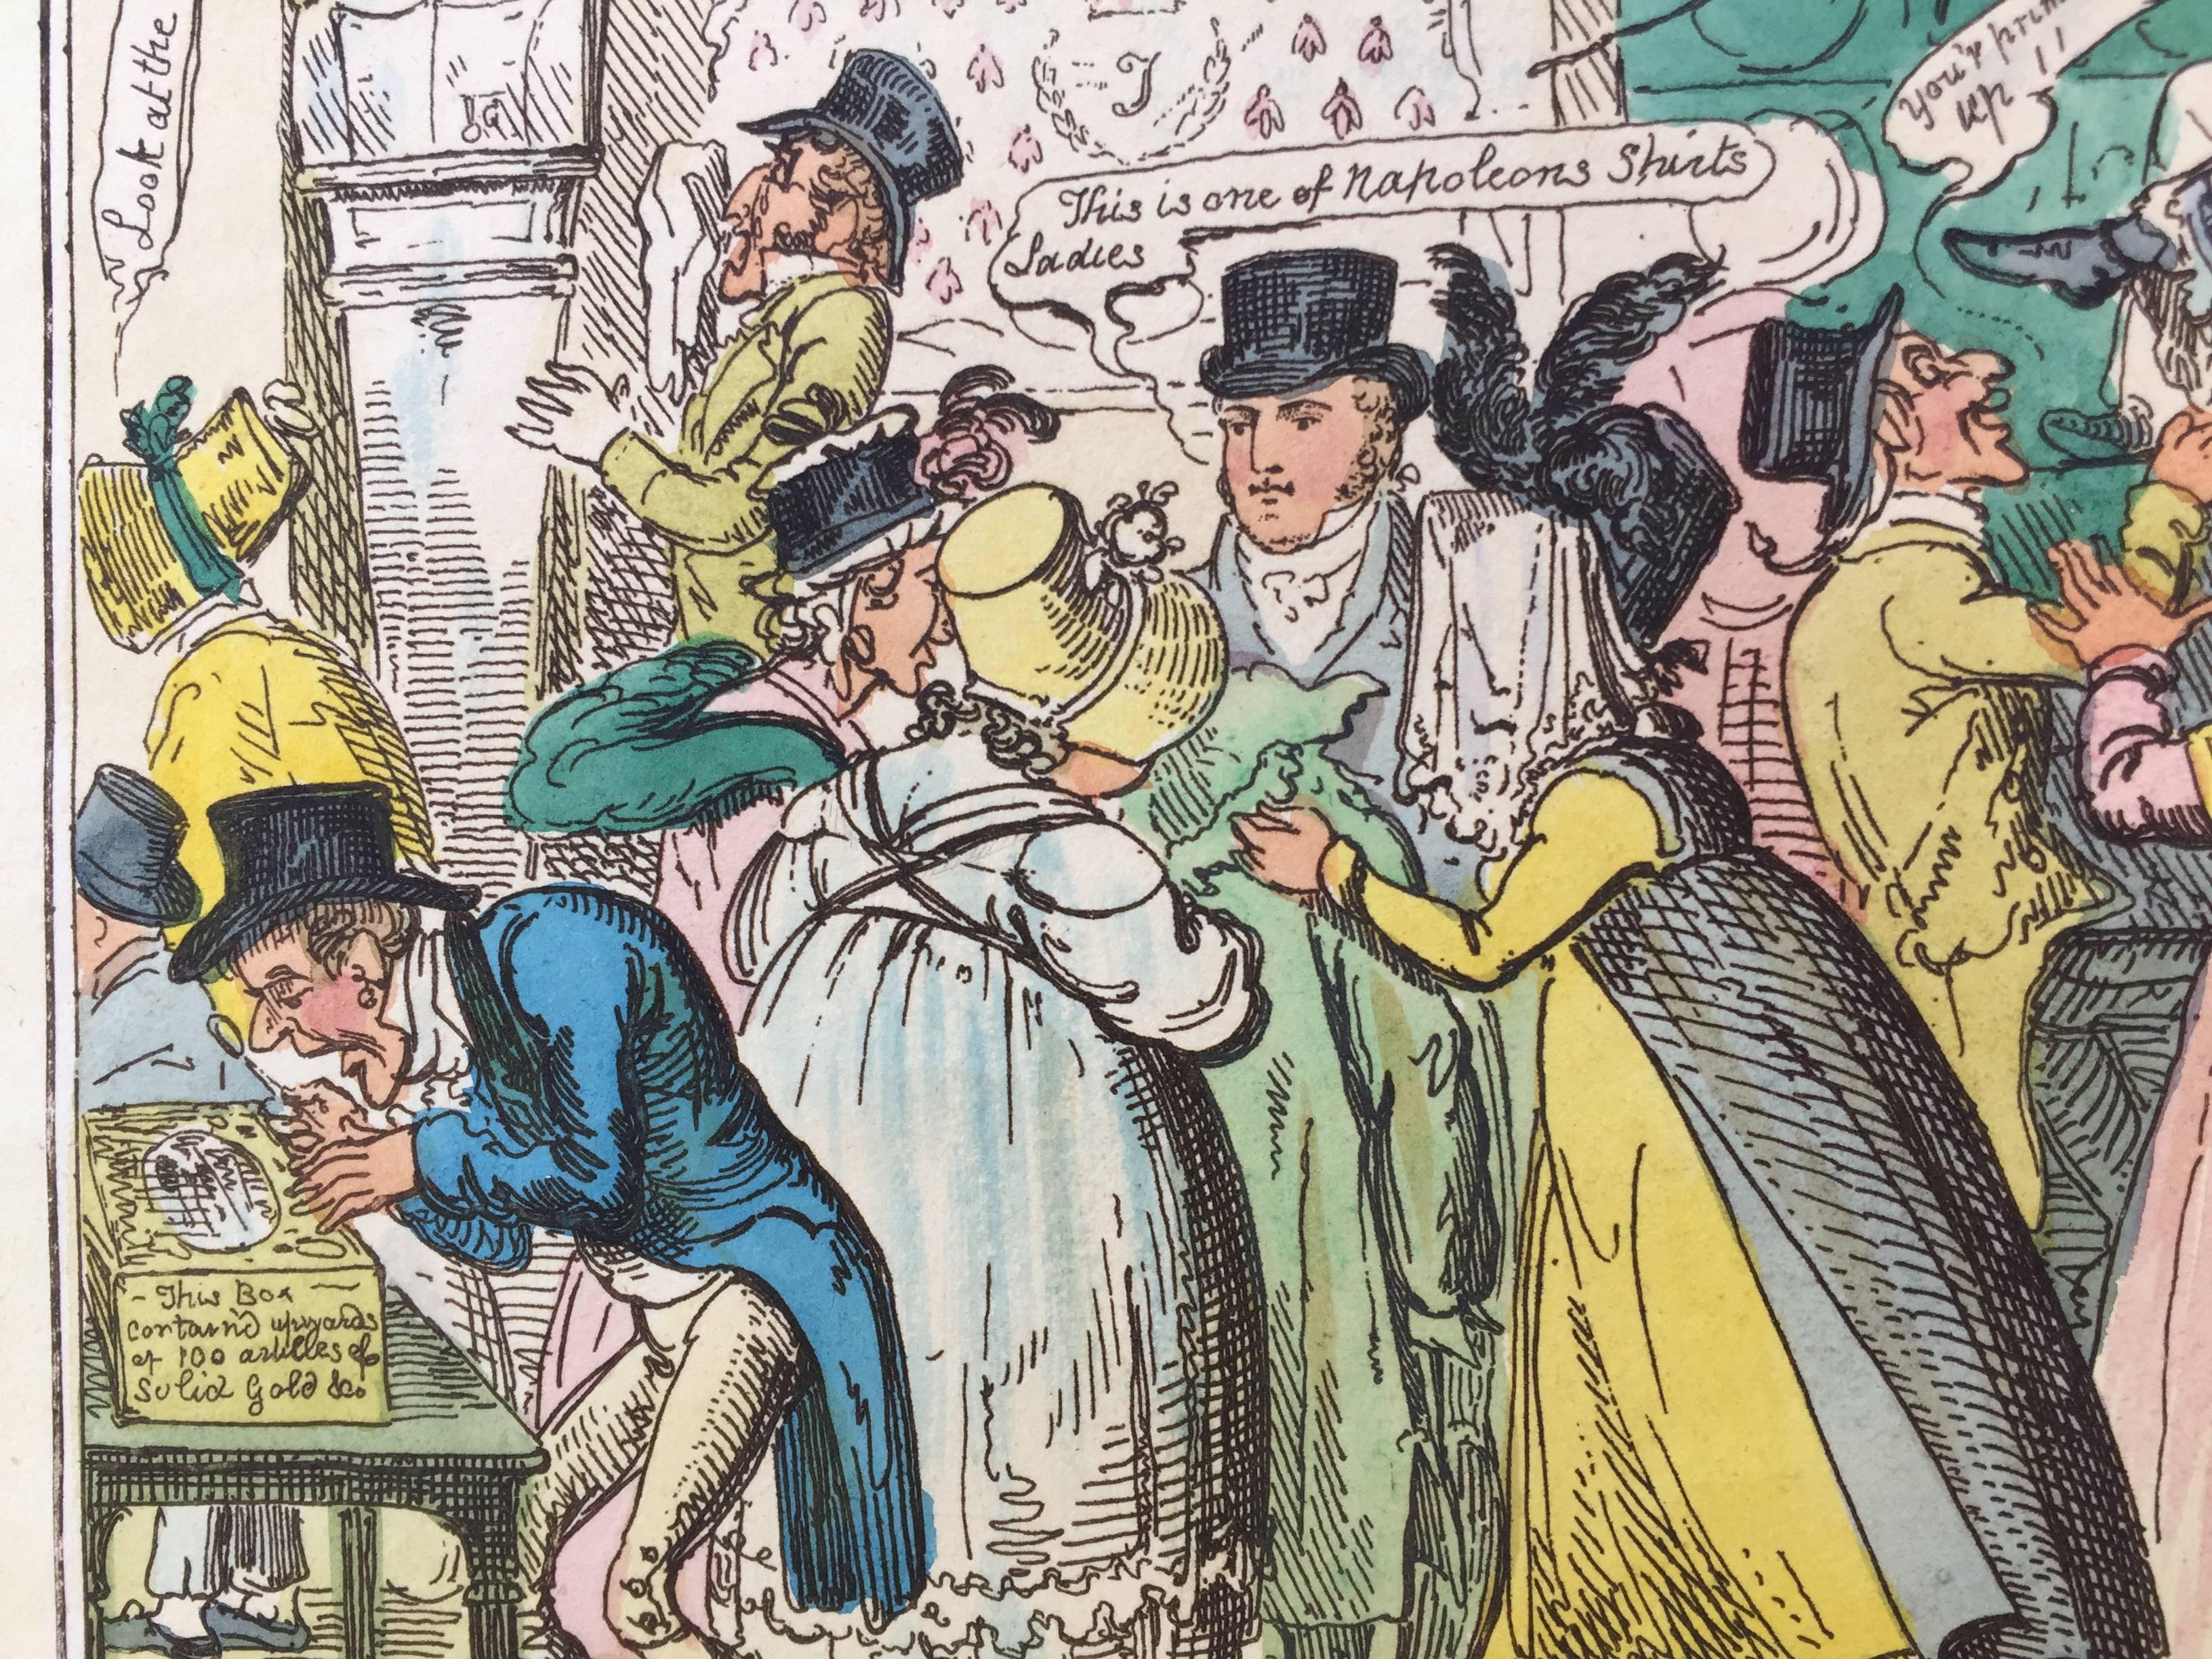 SCENE AT THE LONDON MUSEUM - PICCADILLY  - Print by George Cruikshank